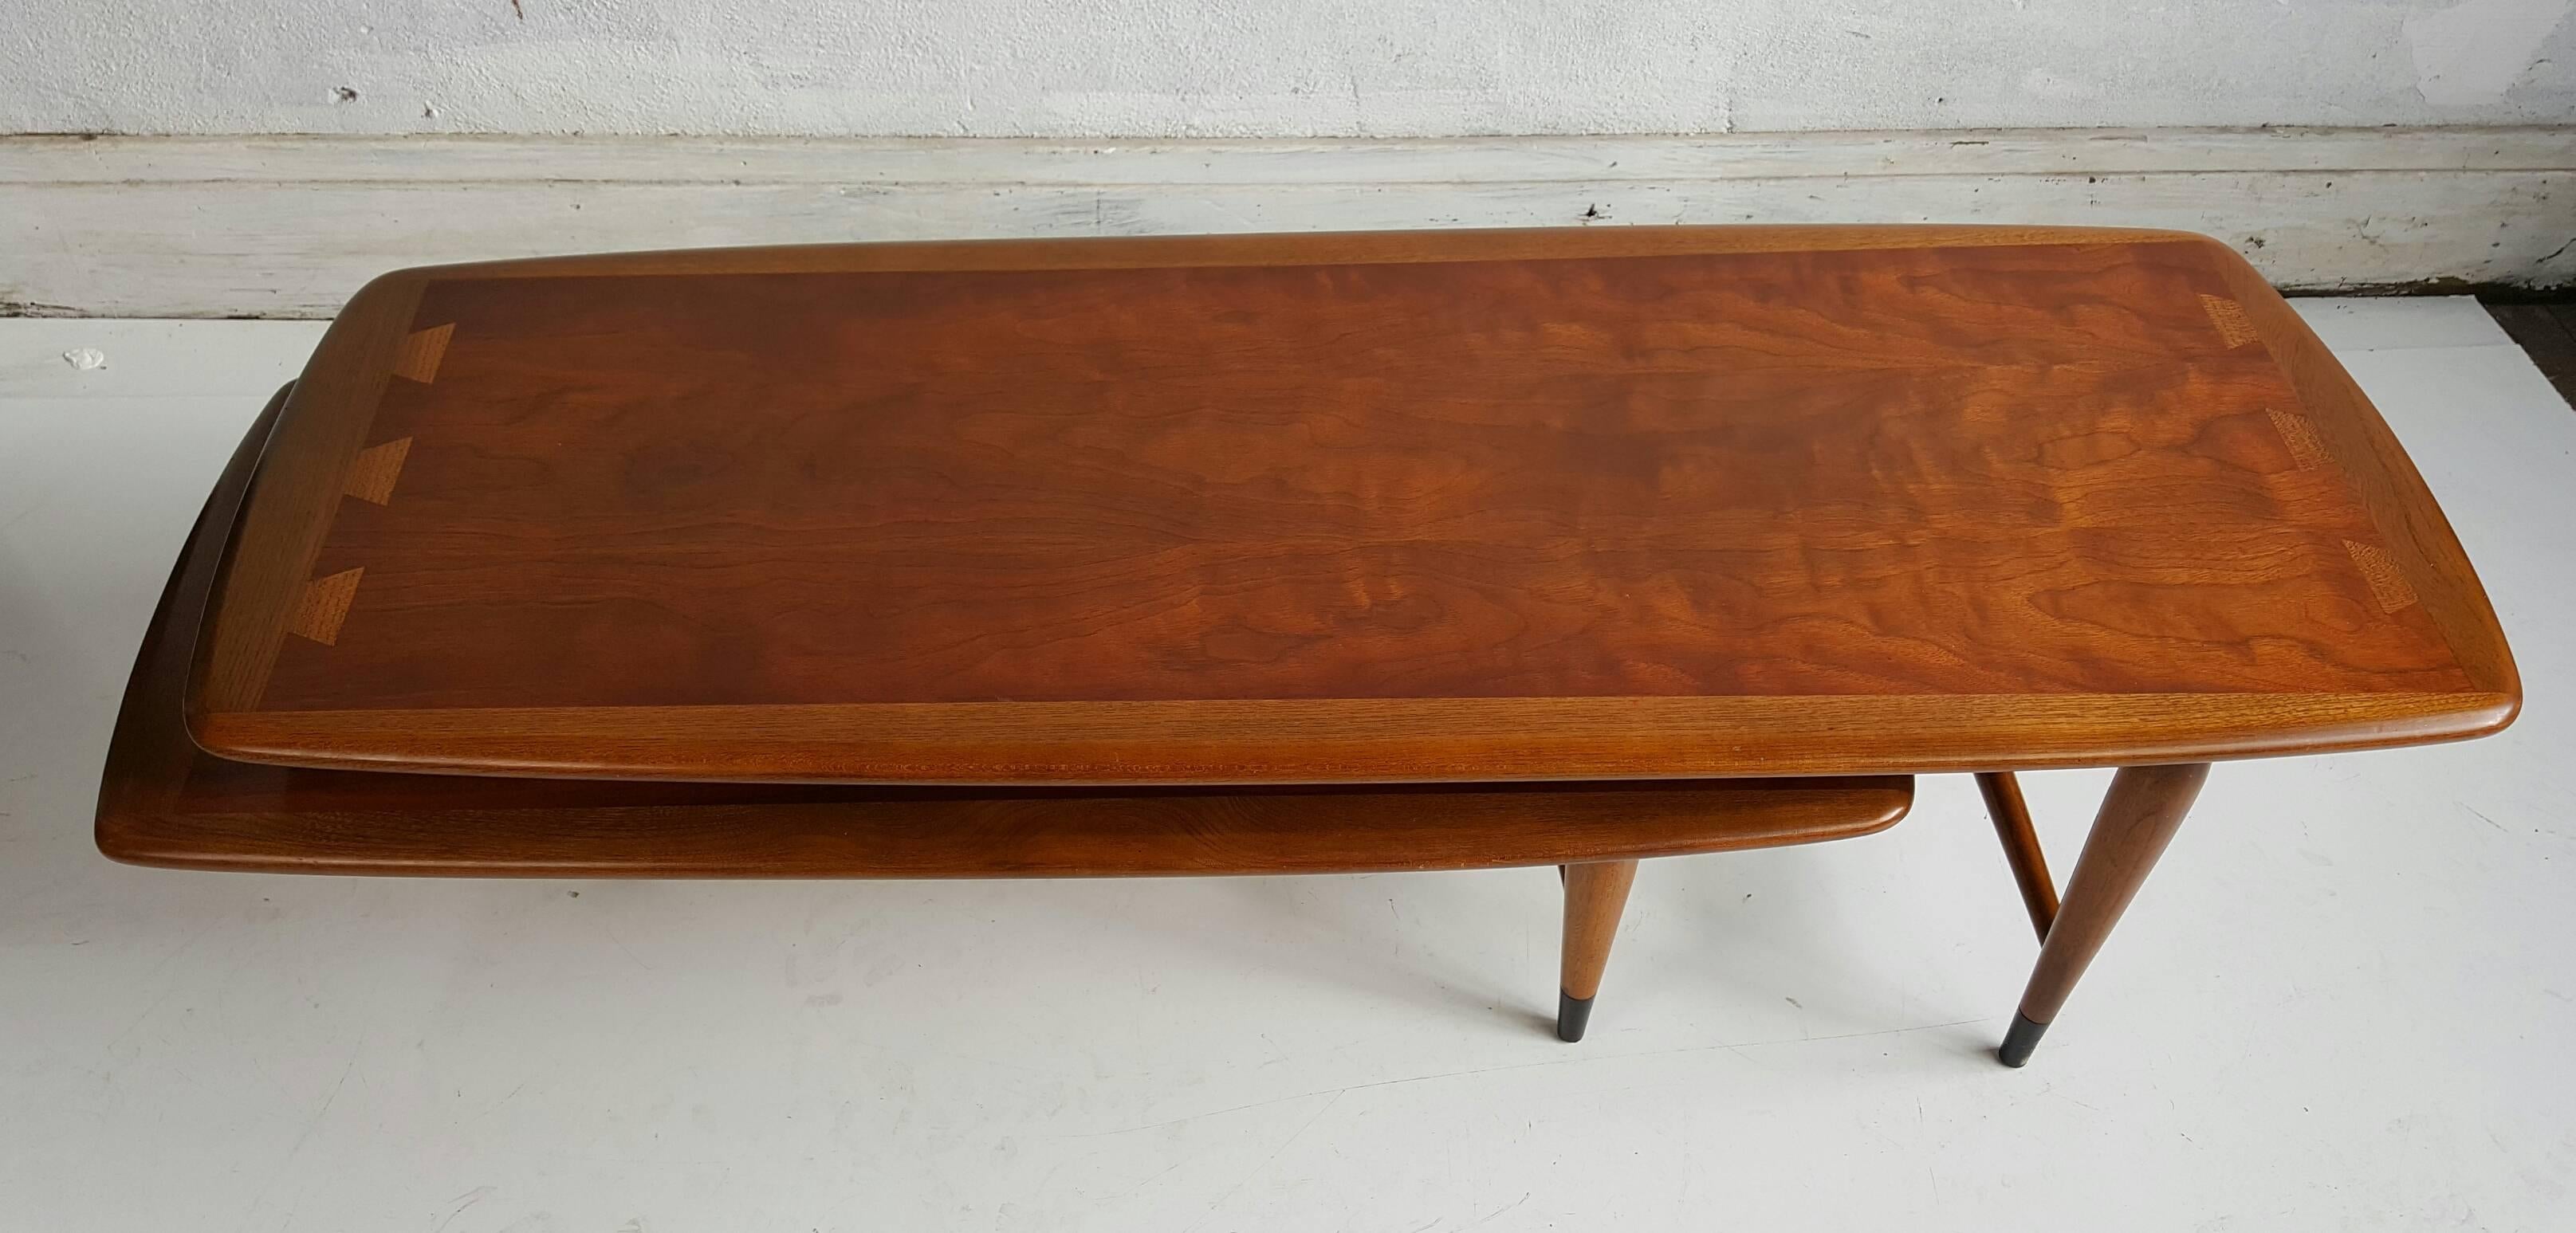 20th Century Classic Modernist Lane 'Acclaim' Switchblade Cocktail Table